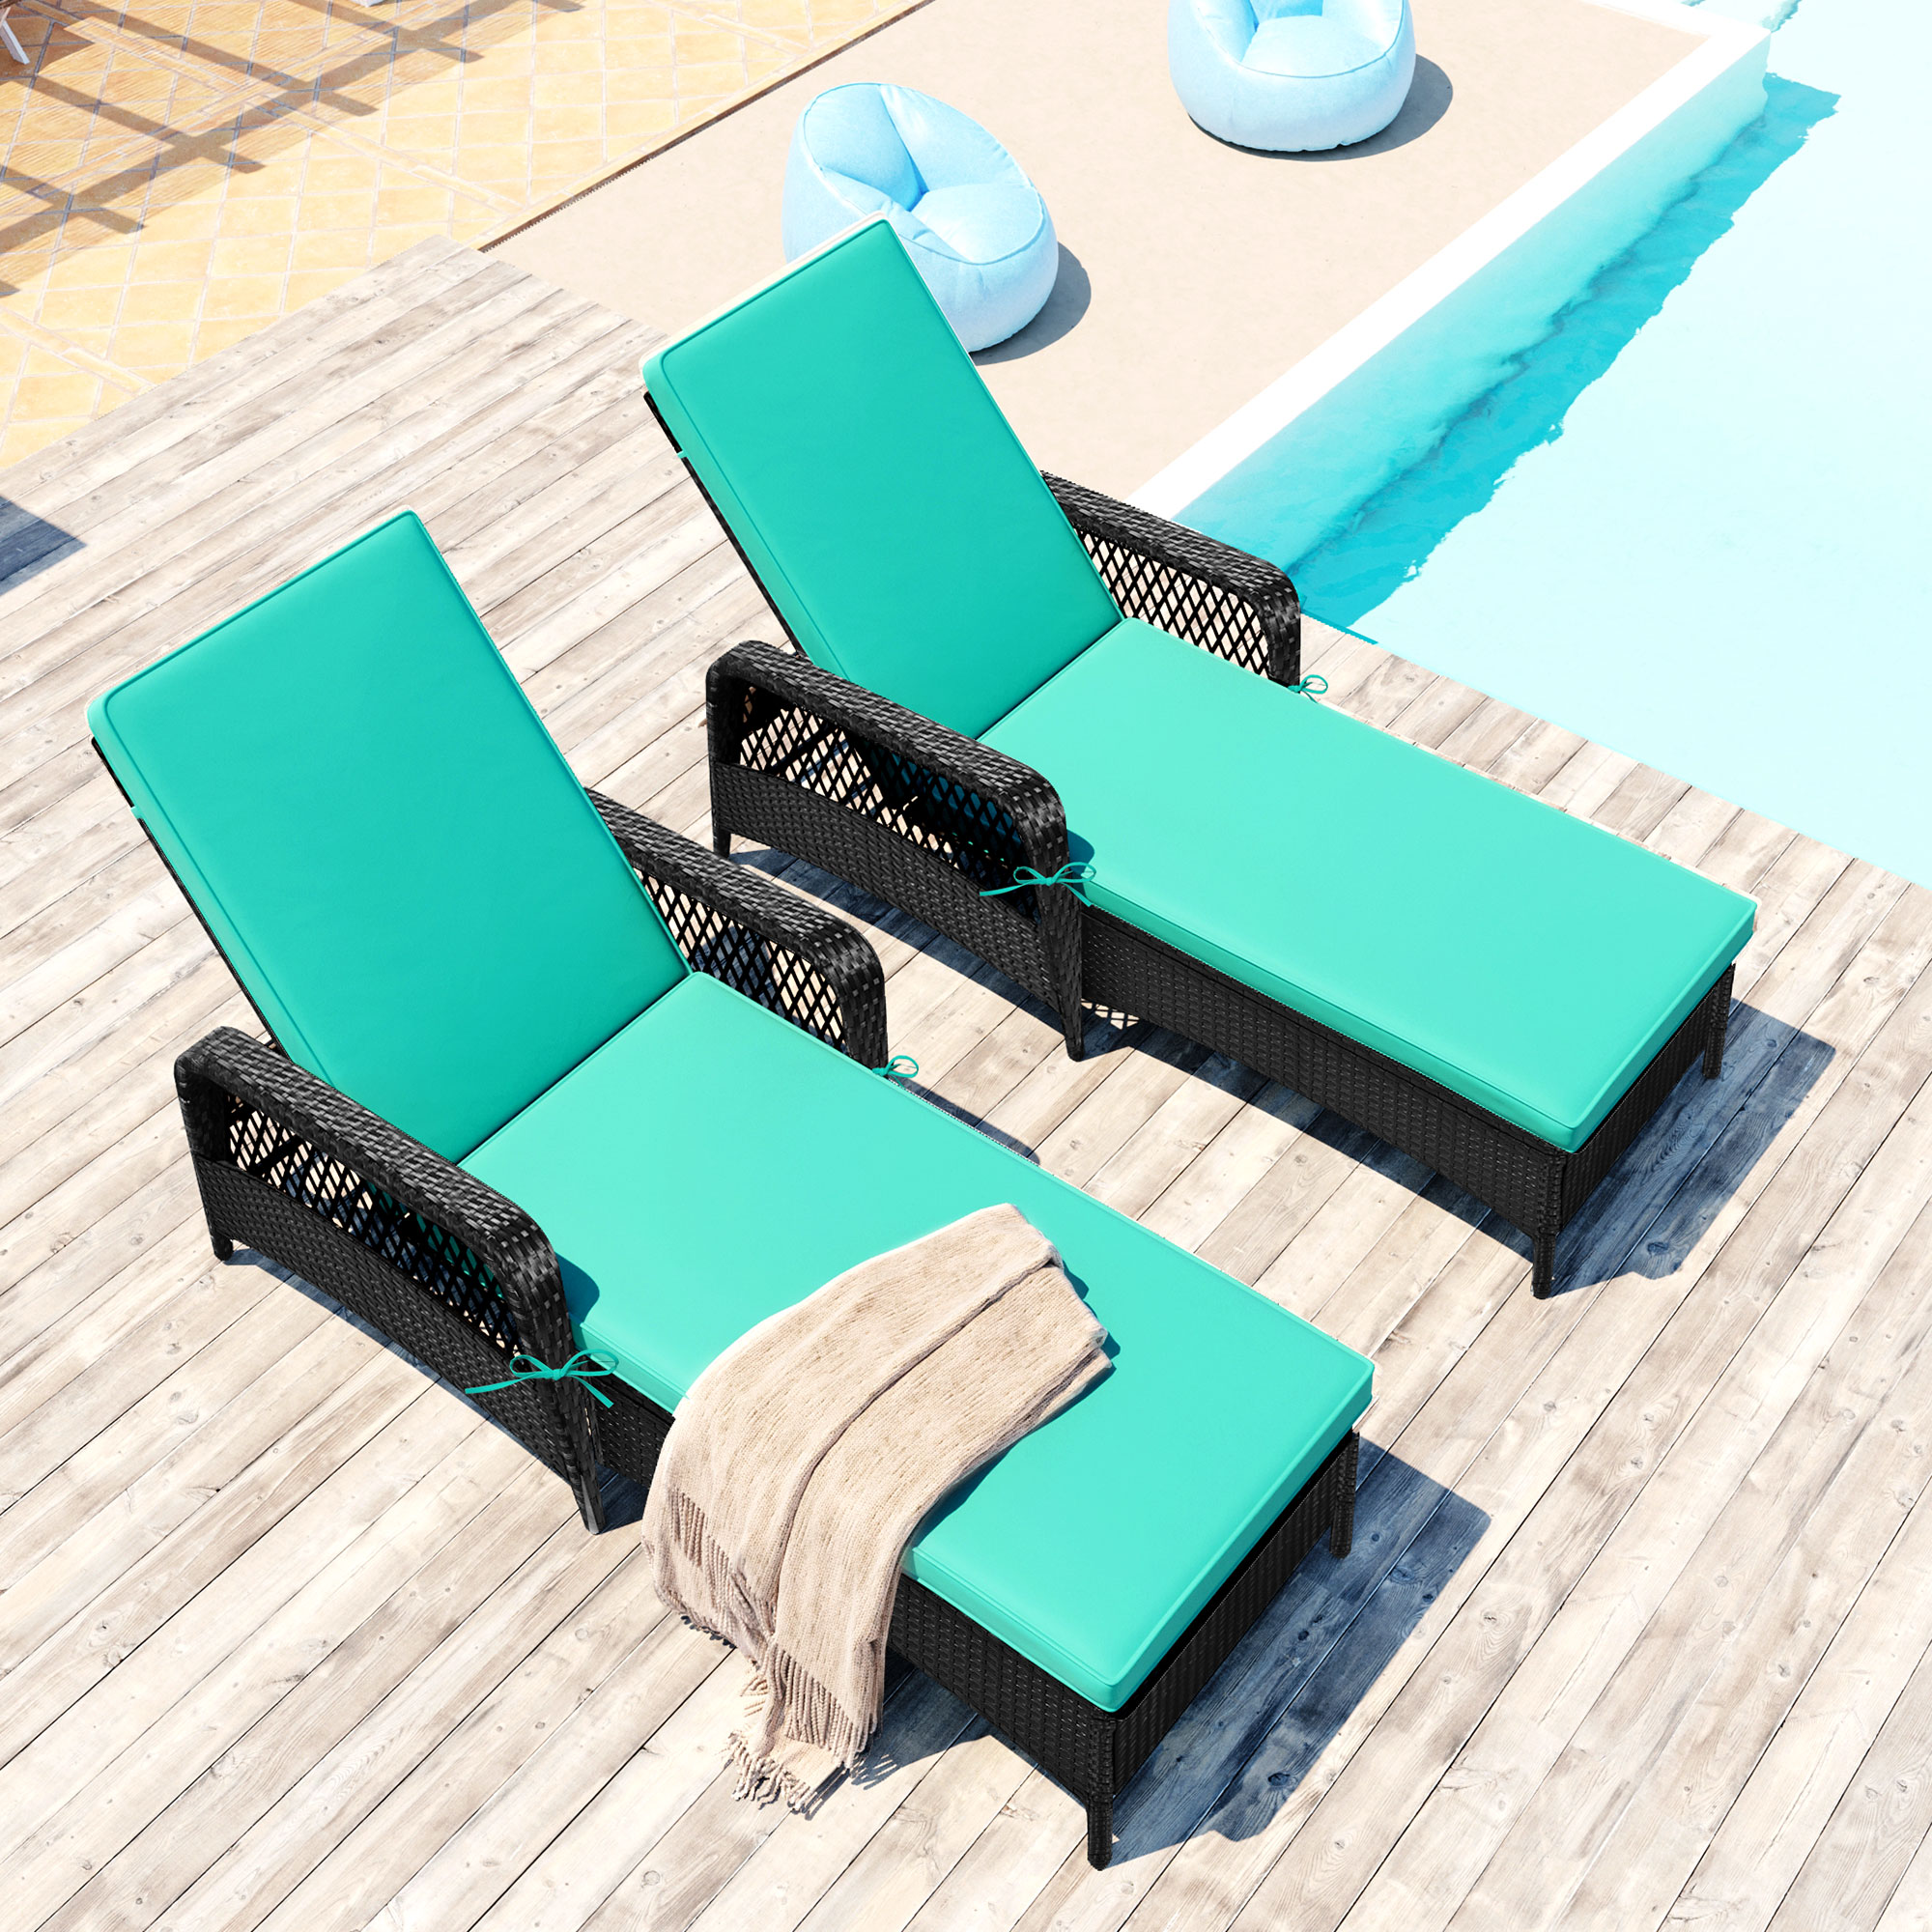 Patio Lounge Chairs Set of 2, Outdoor Chaise Lounges Chairs with 6 Backrest Angles, and Removable Cushions, PE Rattan Backrest Lounger Chairs Set for Pool Porch Backyard Patio, K2693 - image 3 of 10